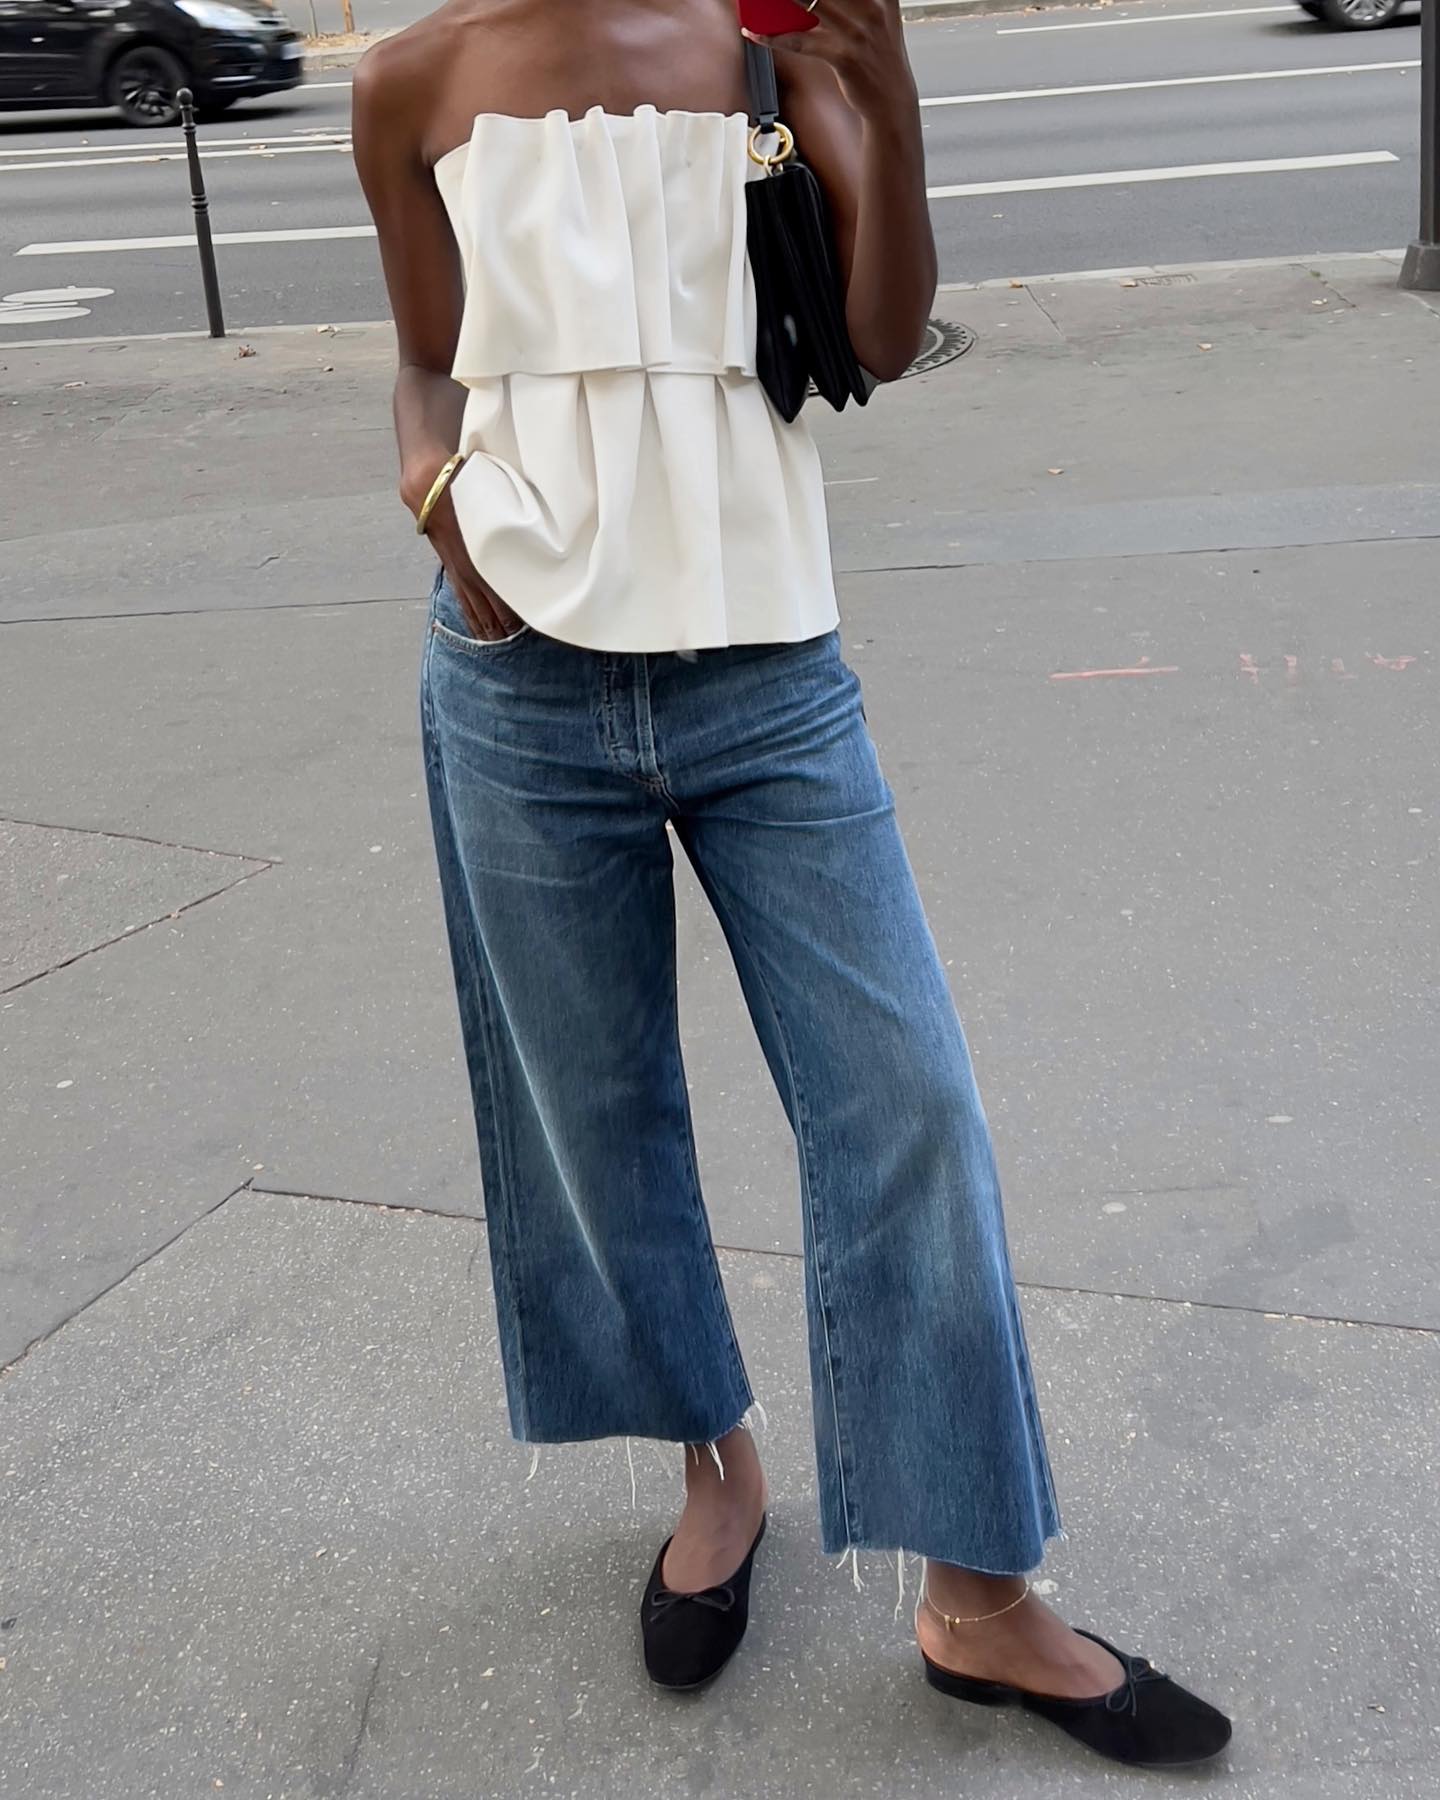 Influencer styles black flat mules with jeans and a white strapless top.